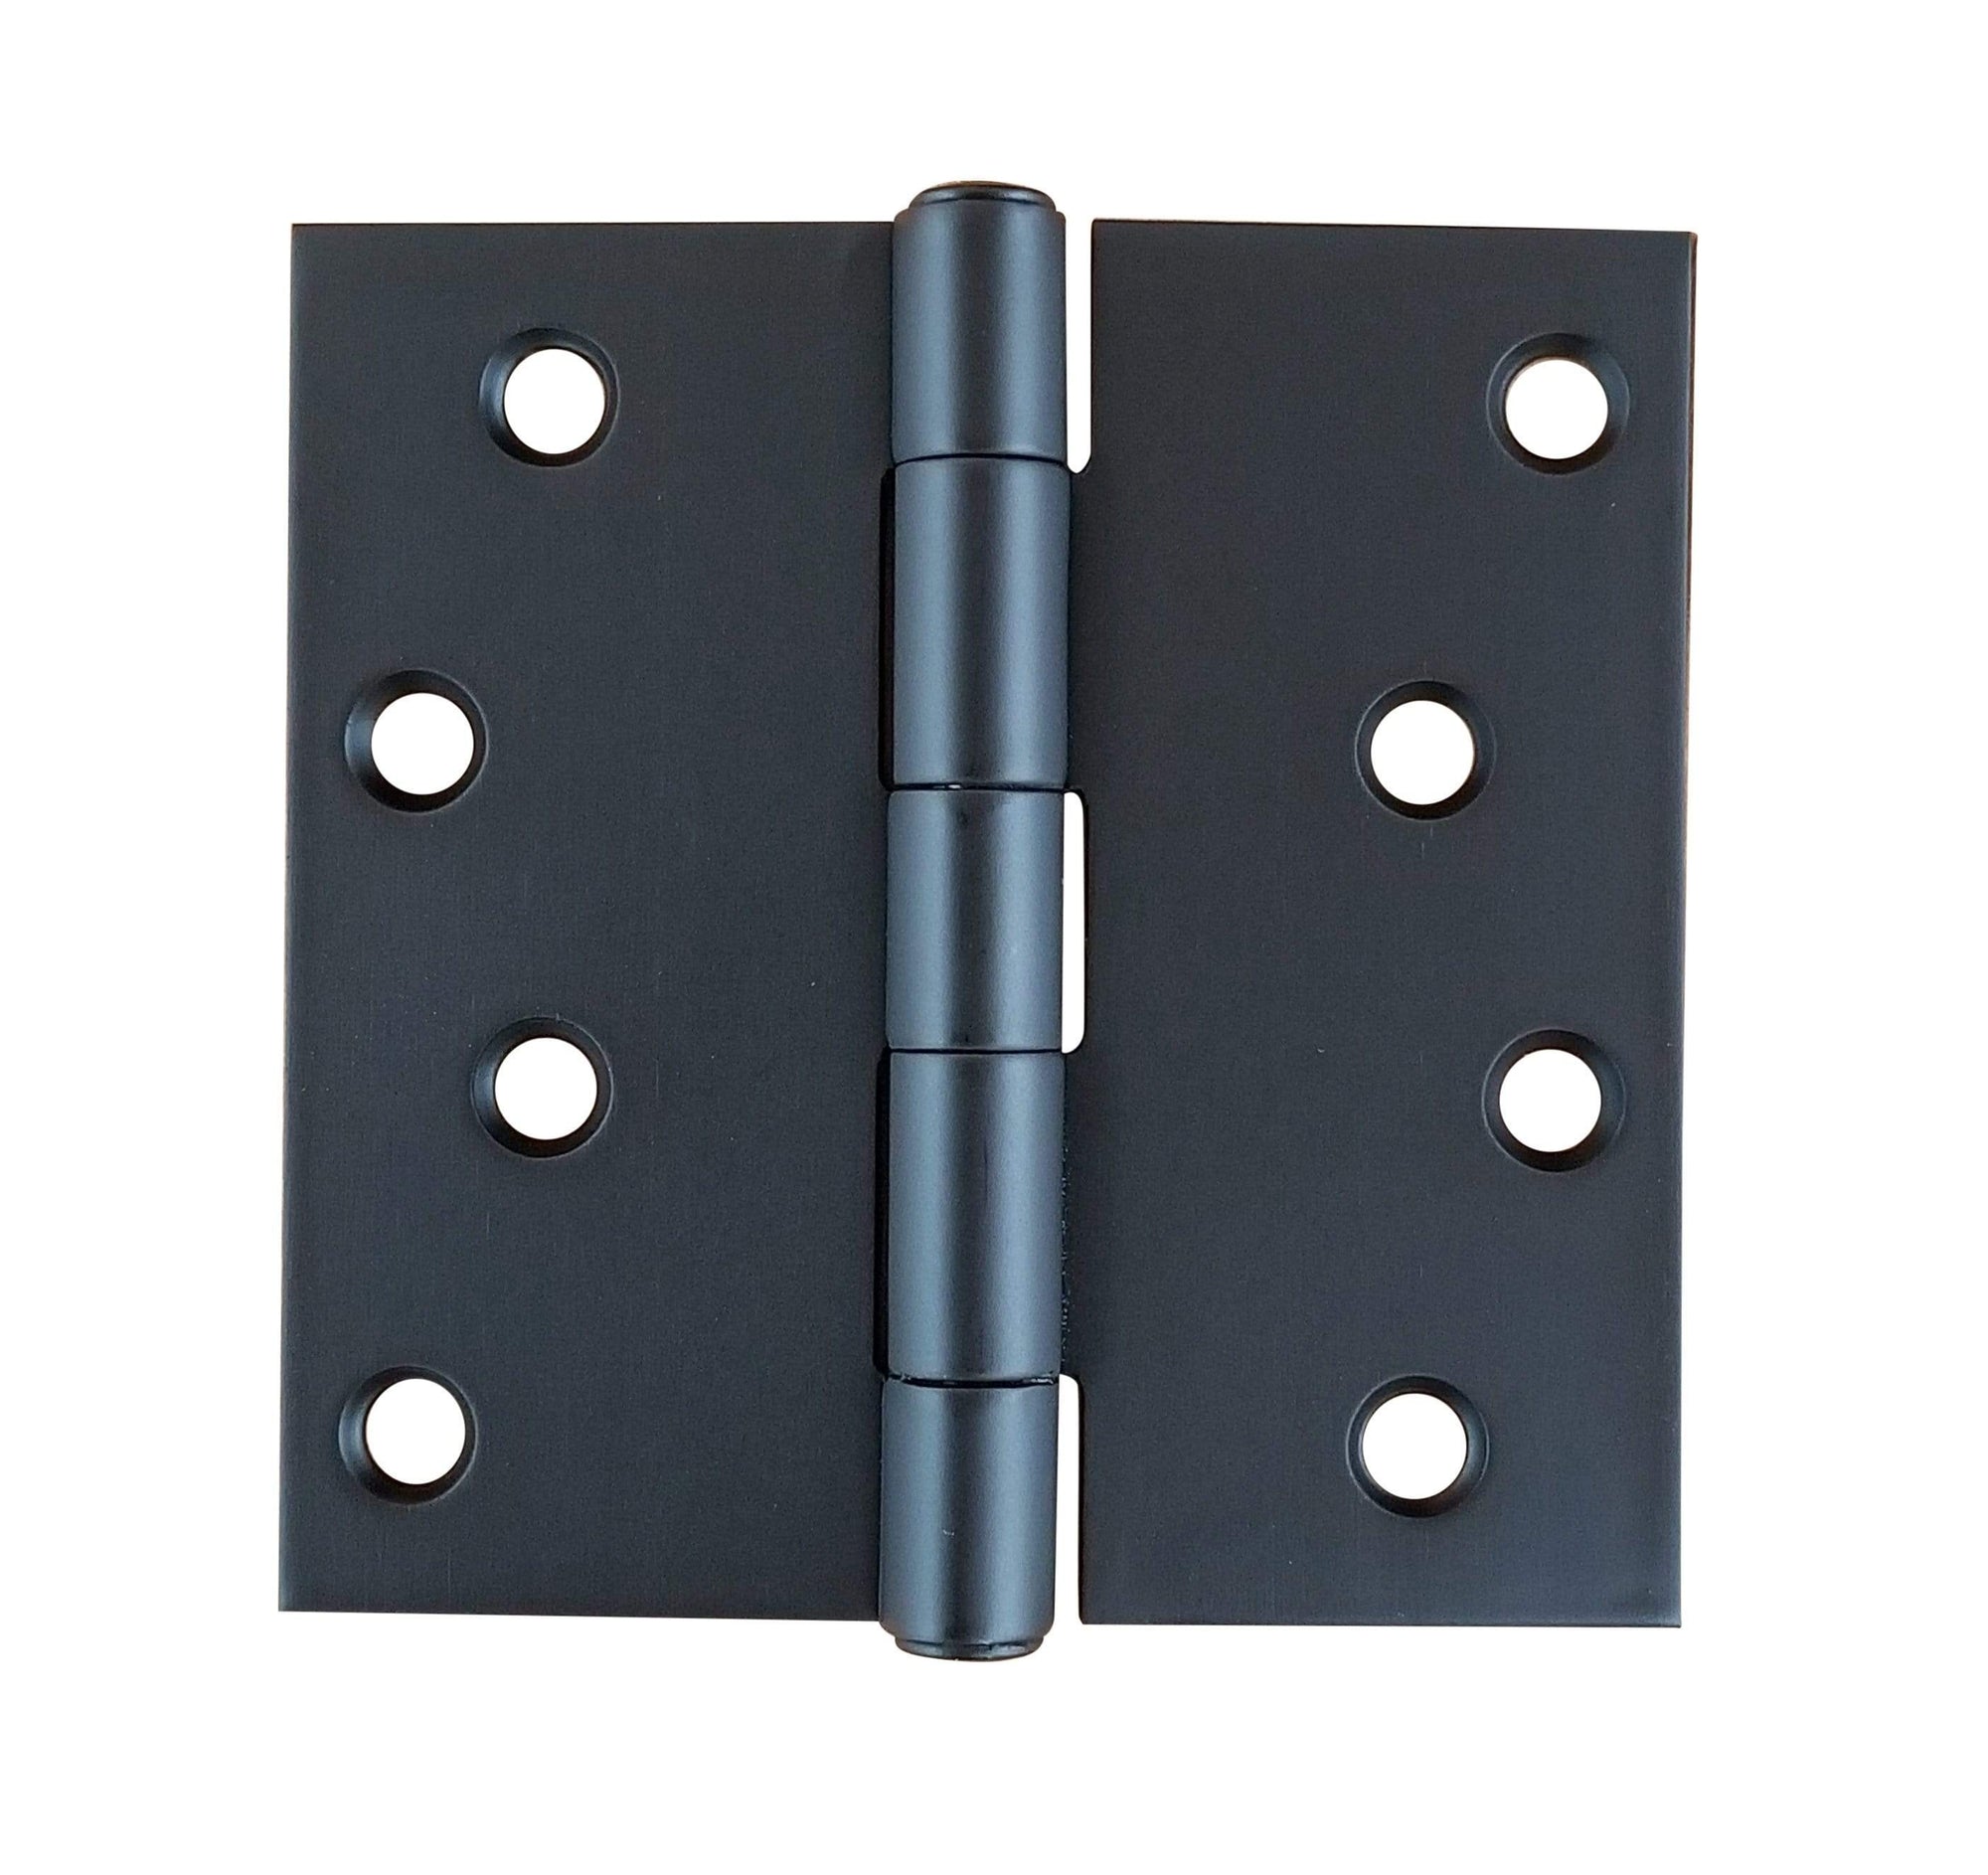 Black Stainless Steel Hinges Residential Hinges - 4" Square - Highly Rust Resistant - 3 Pack